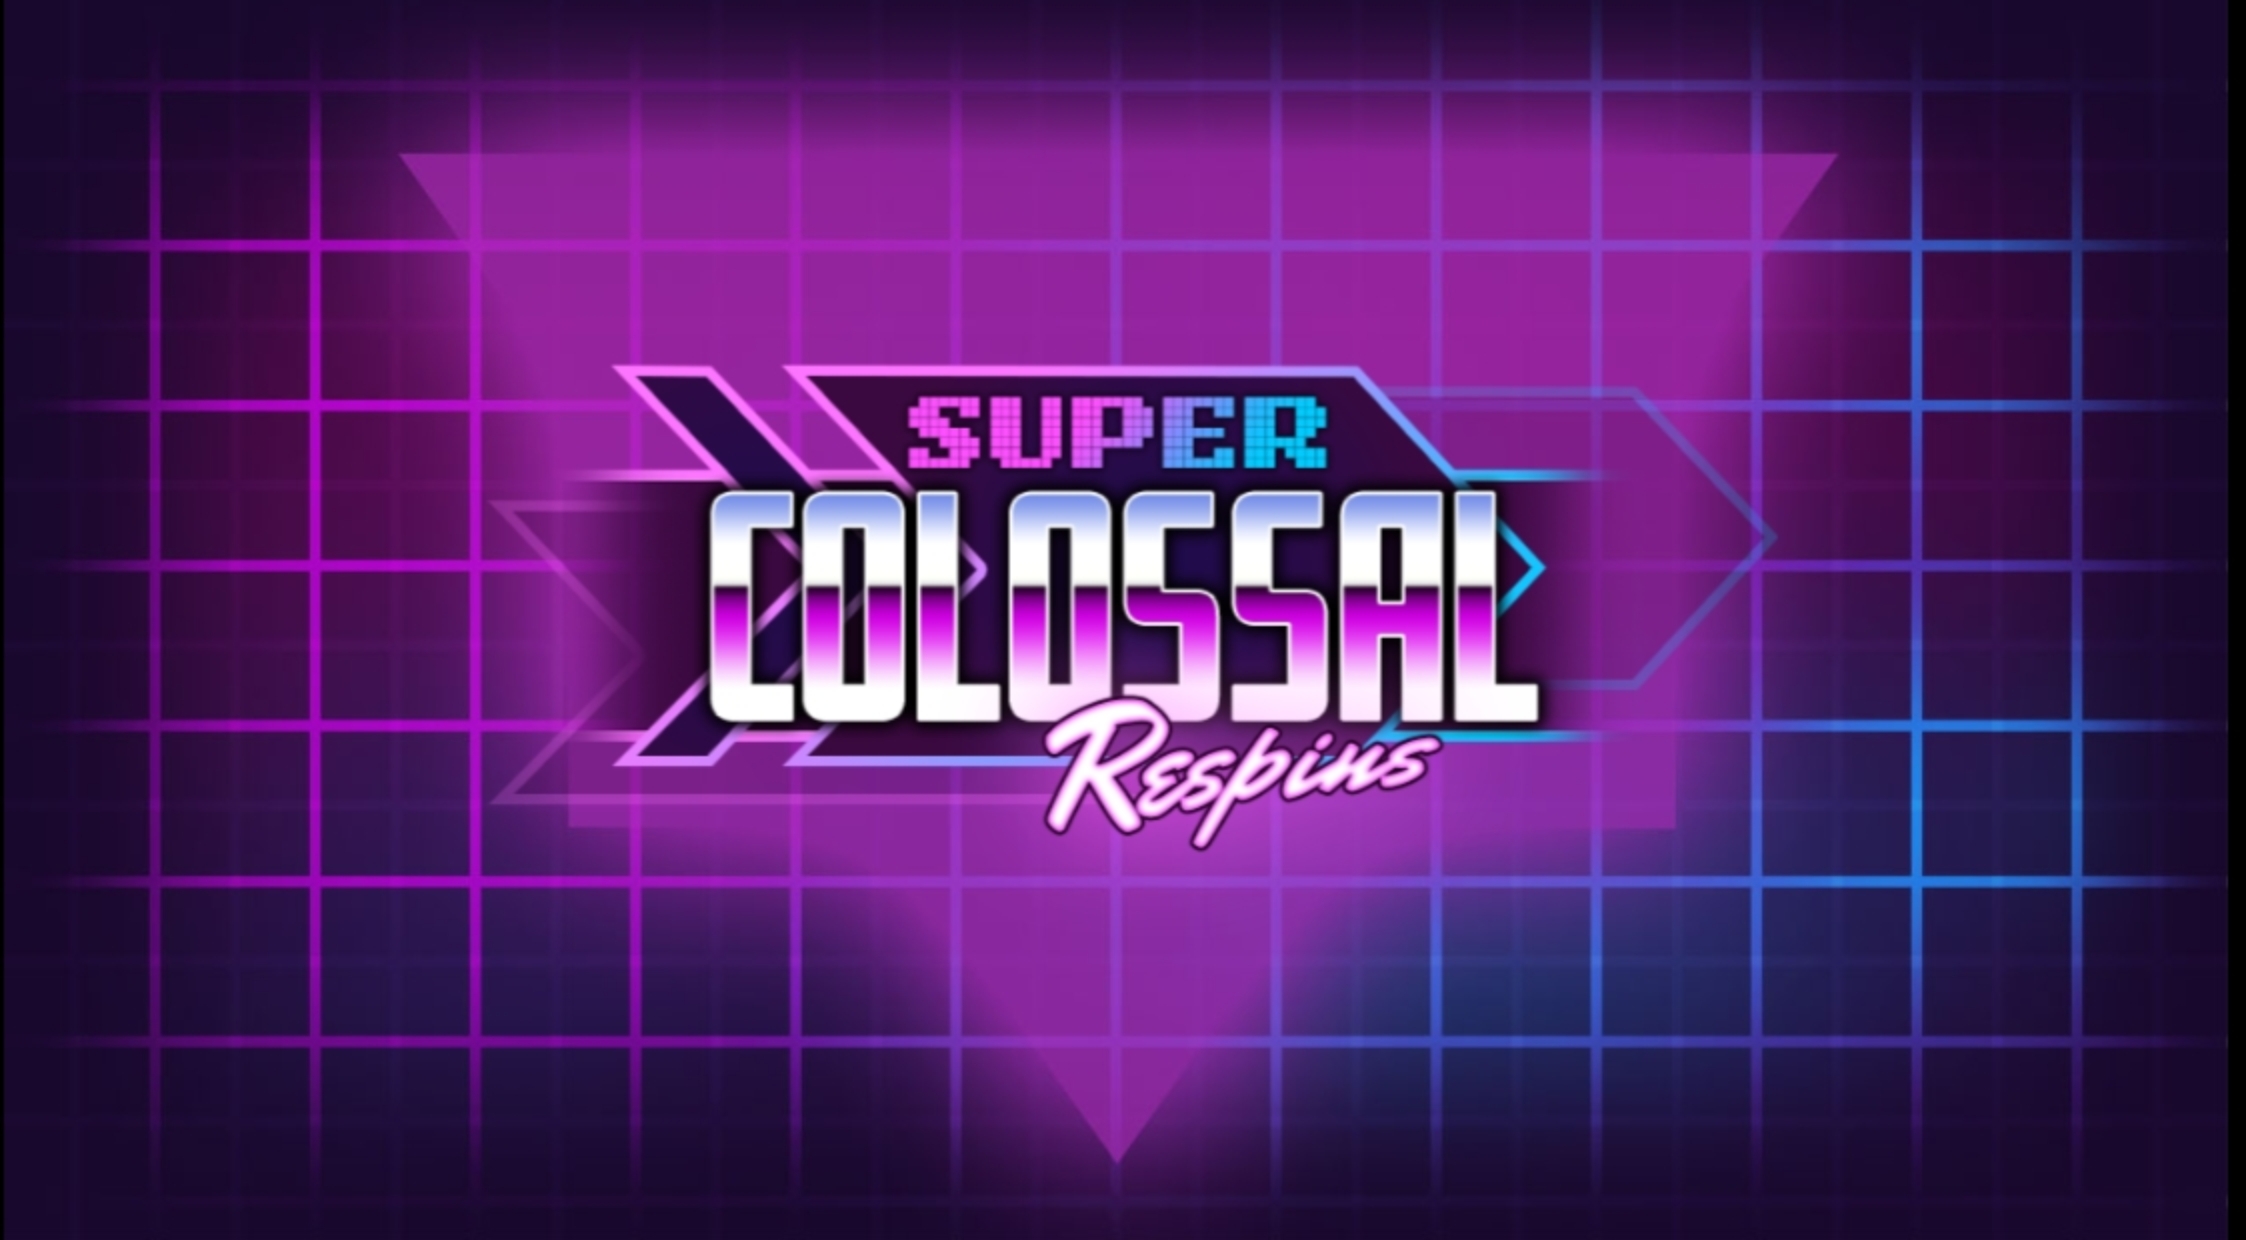 The Super Colossal Respins Online Slot Demo Game by Games Inc